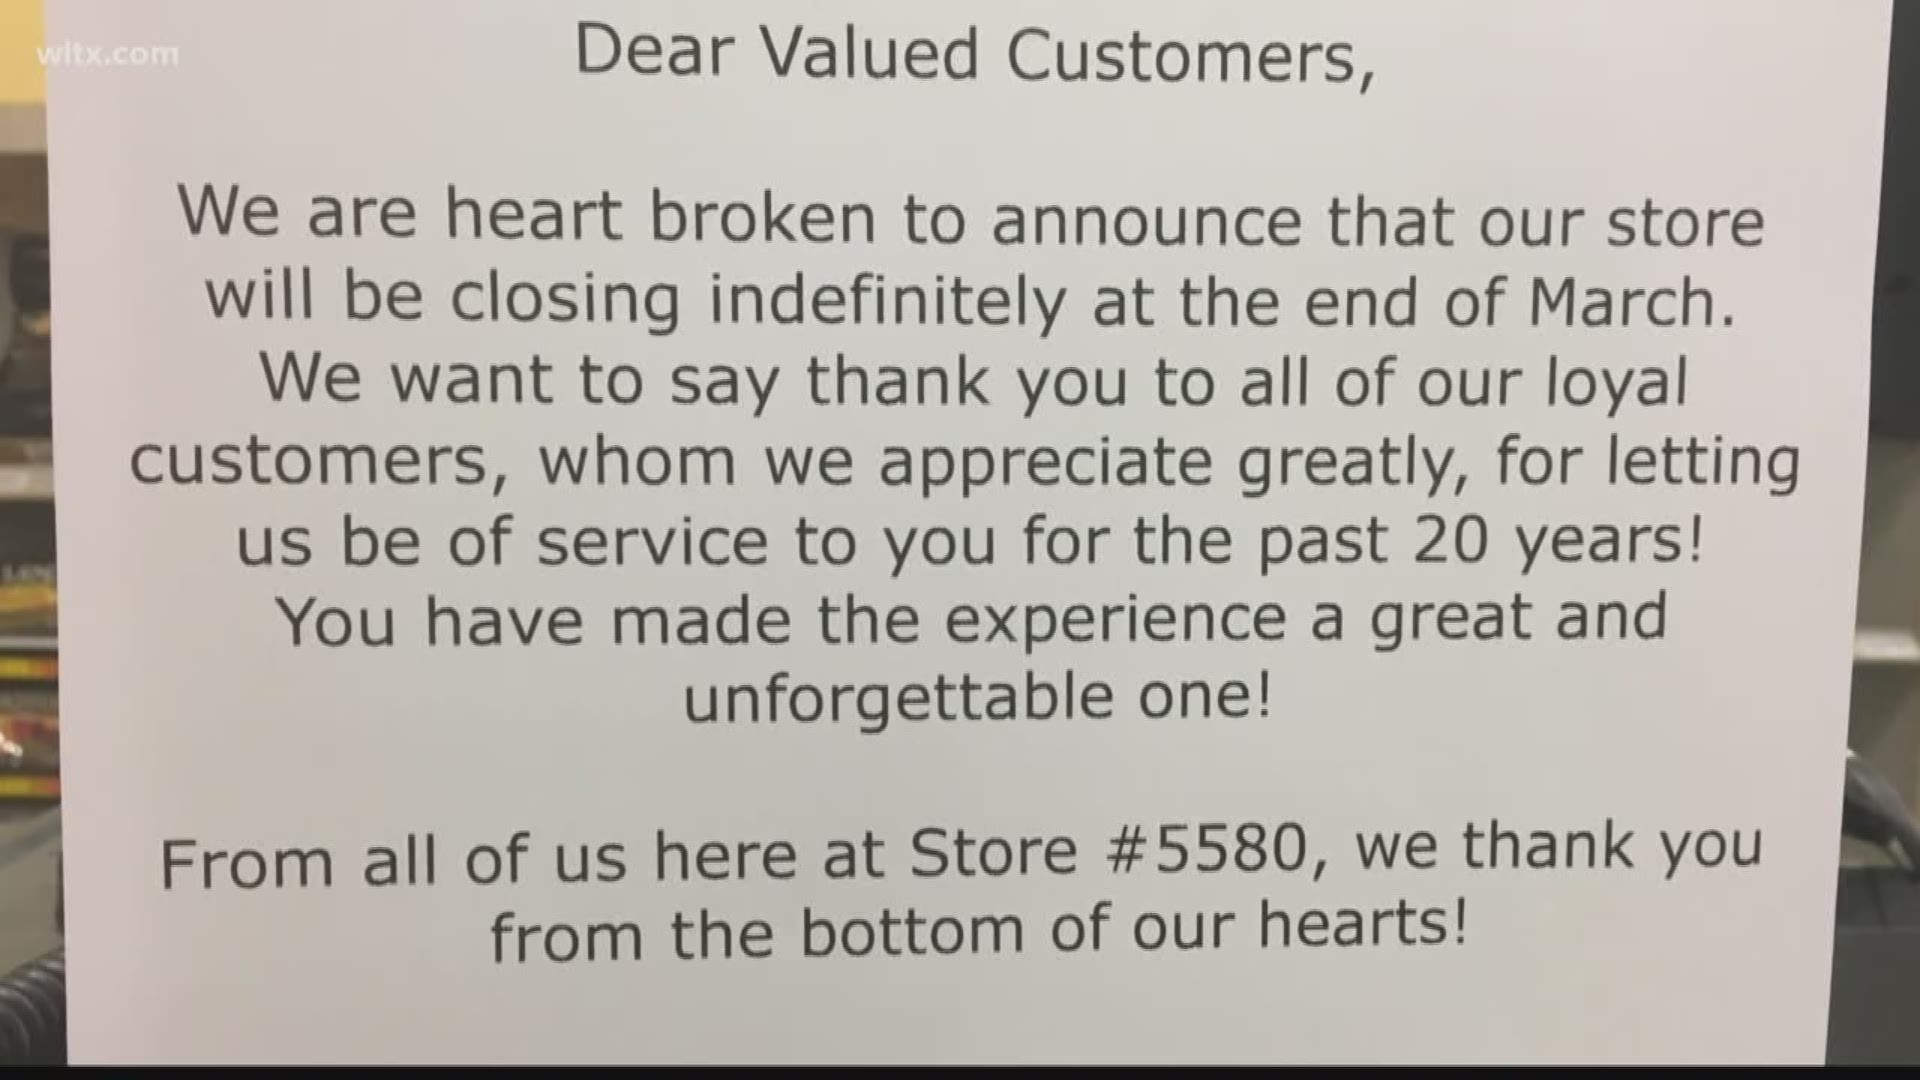 The store made an announcement and said they are heart broken that the stores are going to close at the end of March